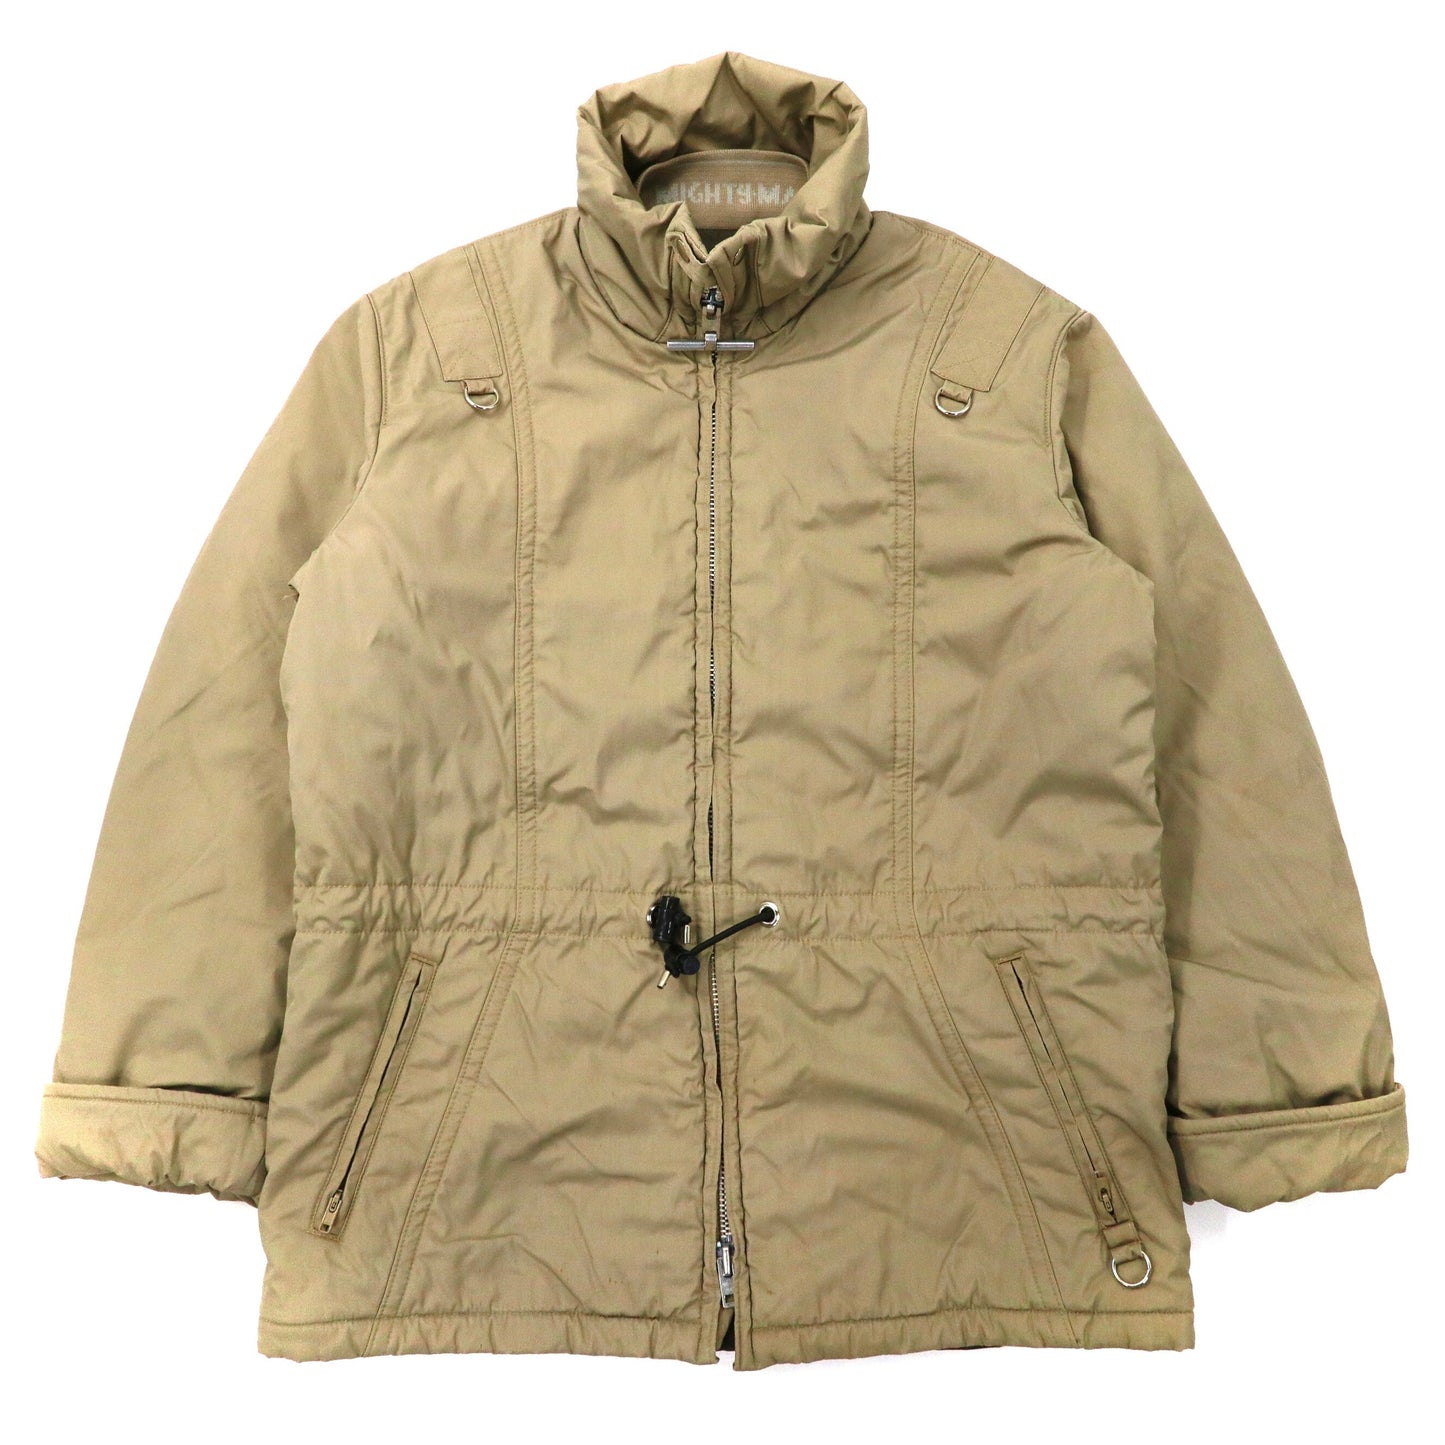 Mighty Mac Puffer Jacket 42 Beige Draw Code 70's NORSAC T-shaped 